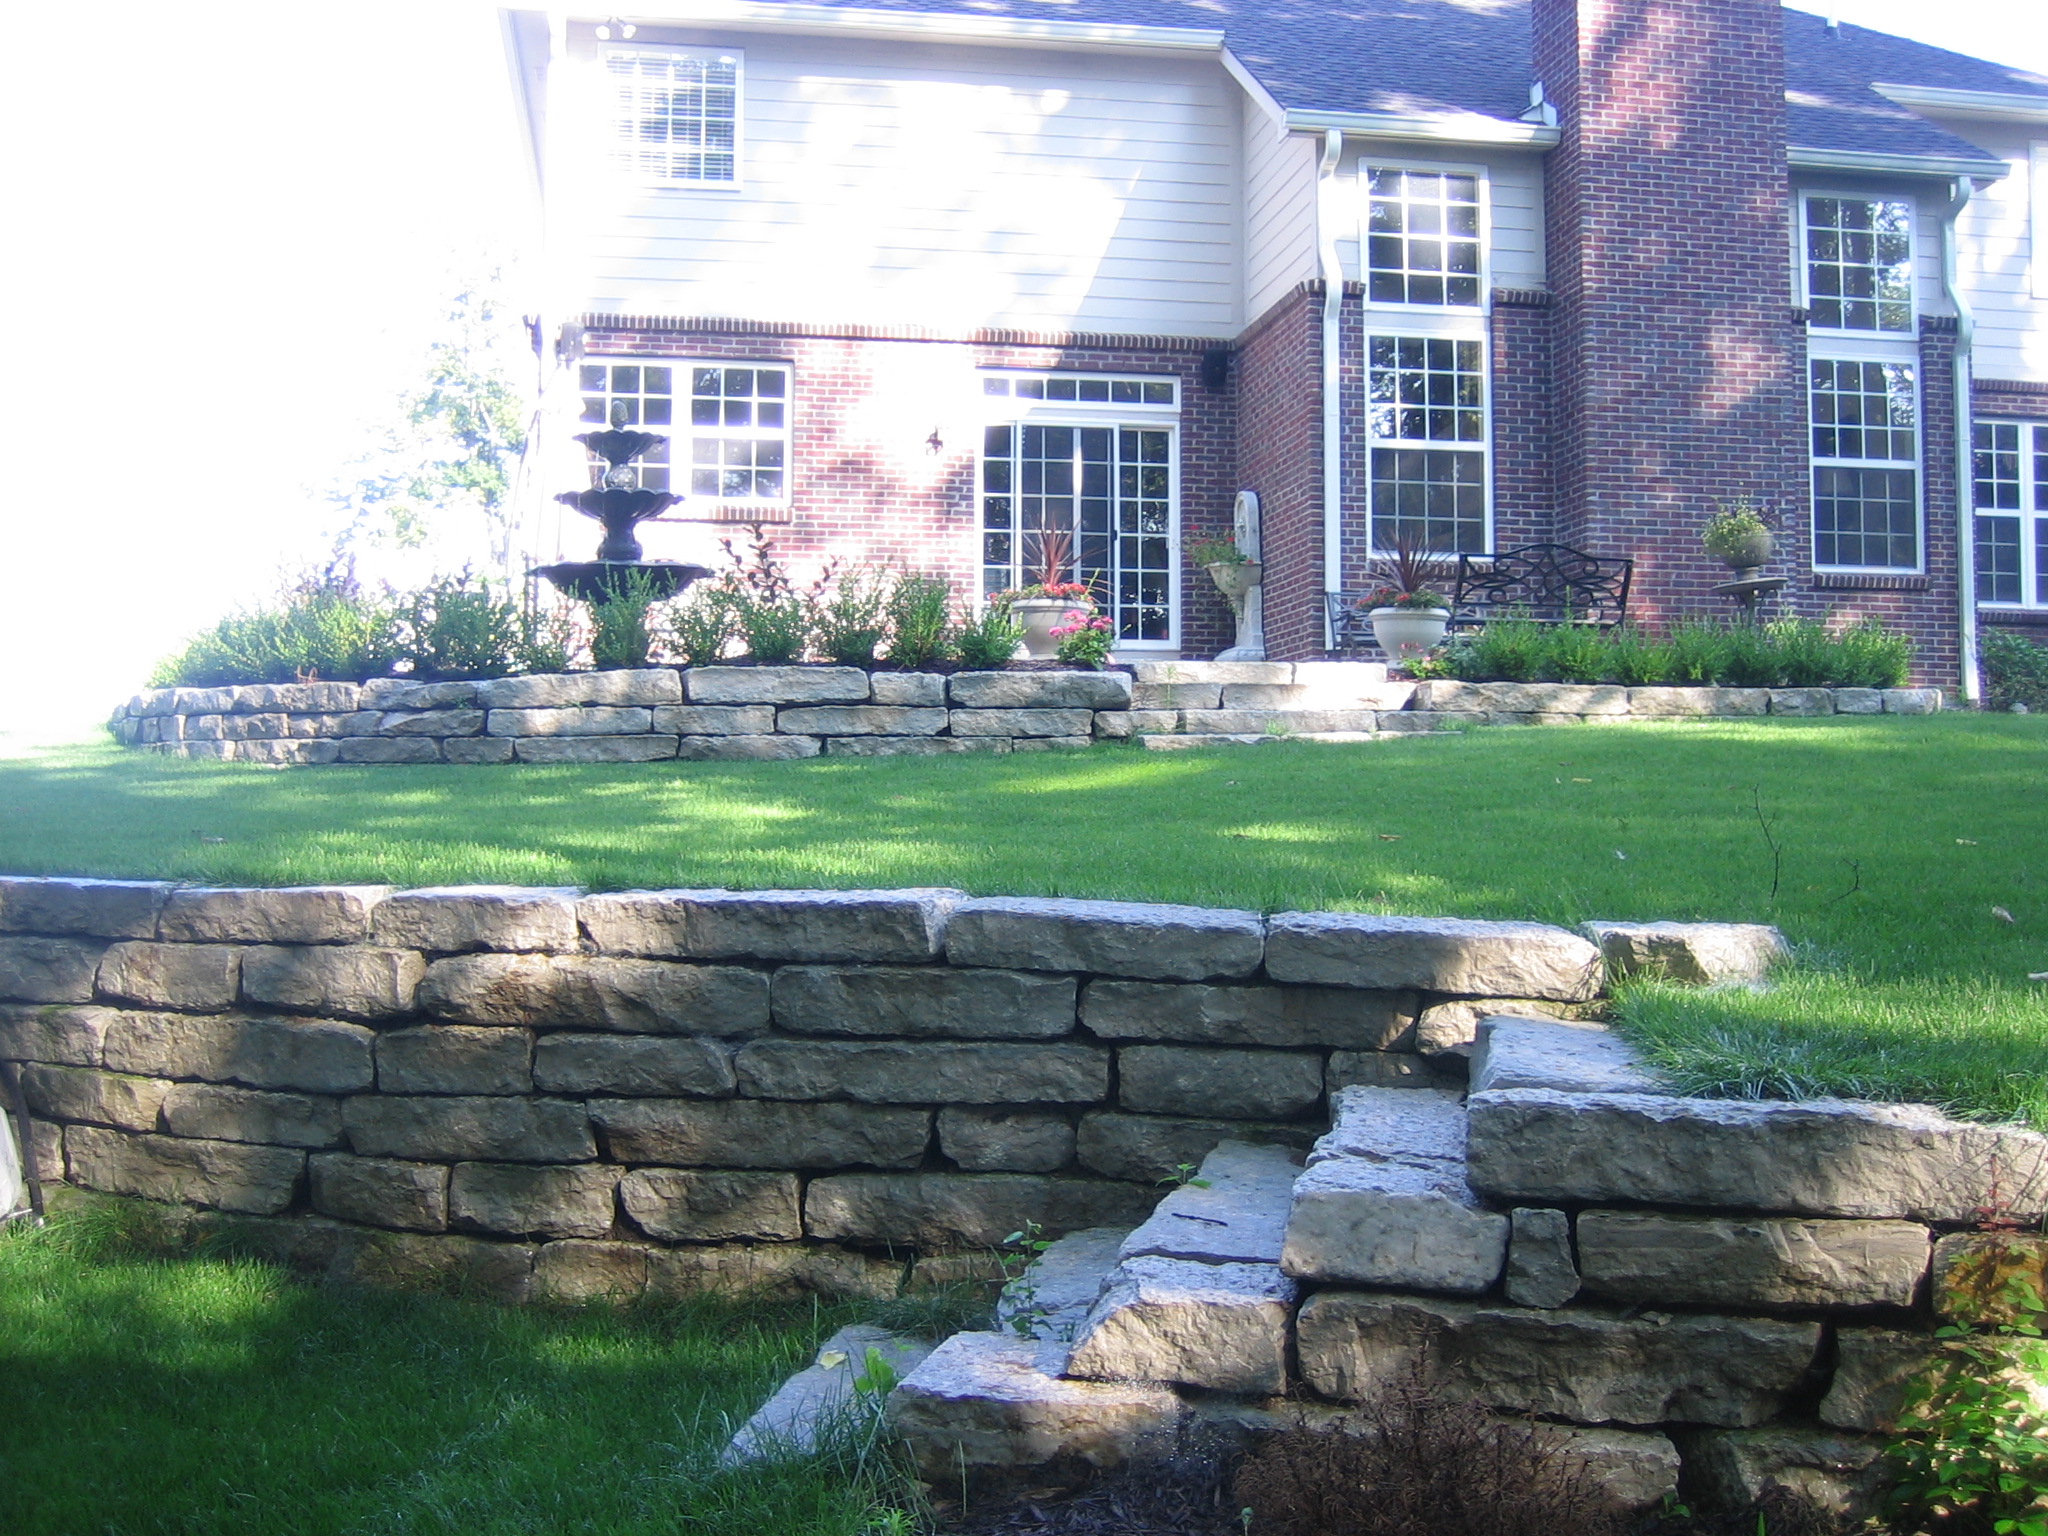 A stone wall and steps on a driveway provide the “triple threat” elements to improve landscaping. (Submitted photo) 